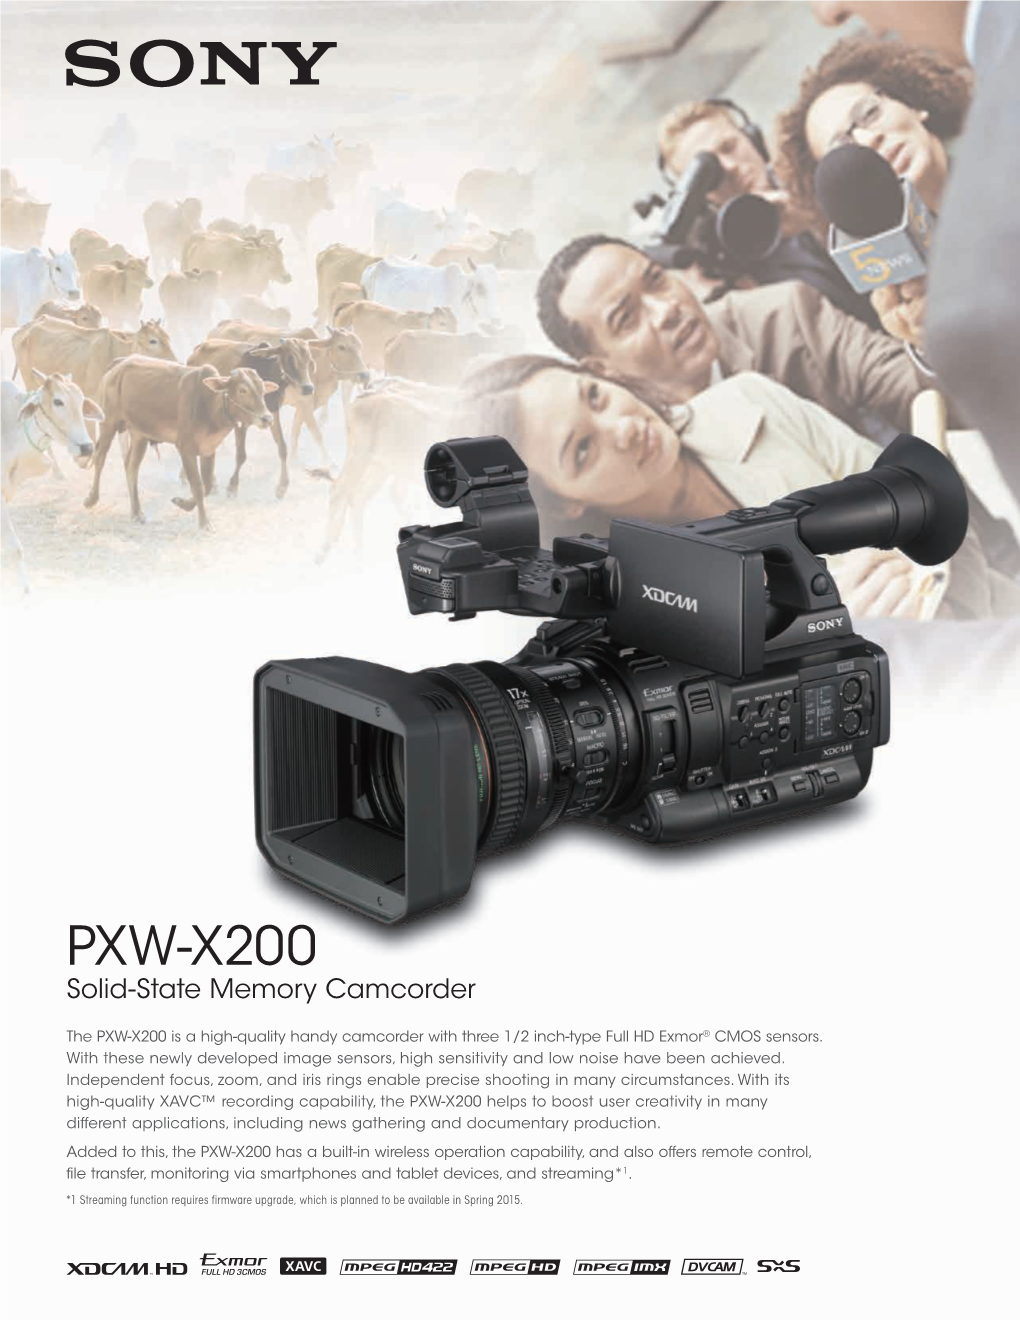 PXW-X200 Solid-State Memory Camcorder